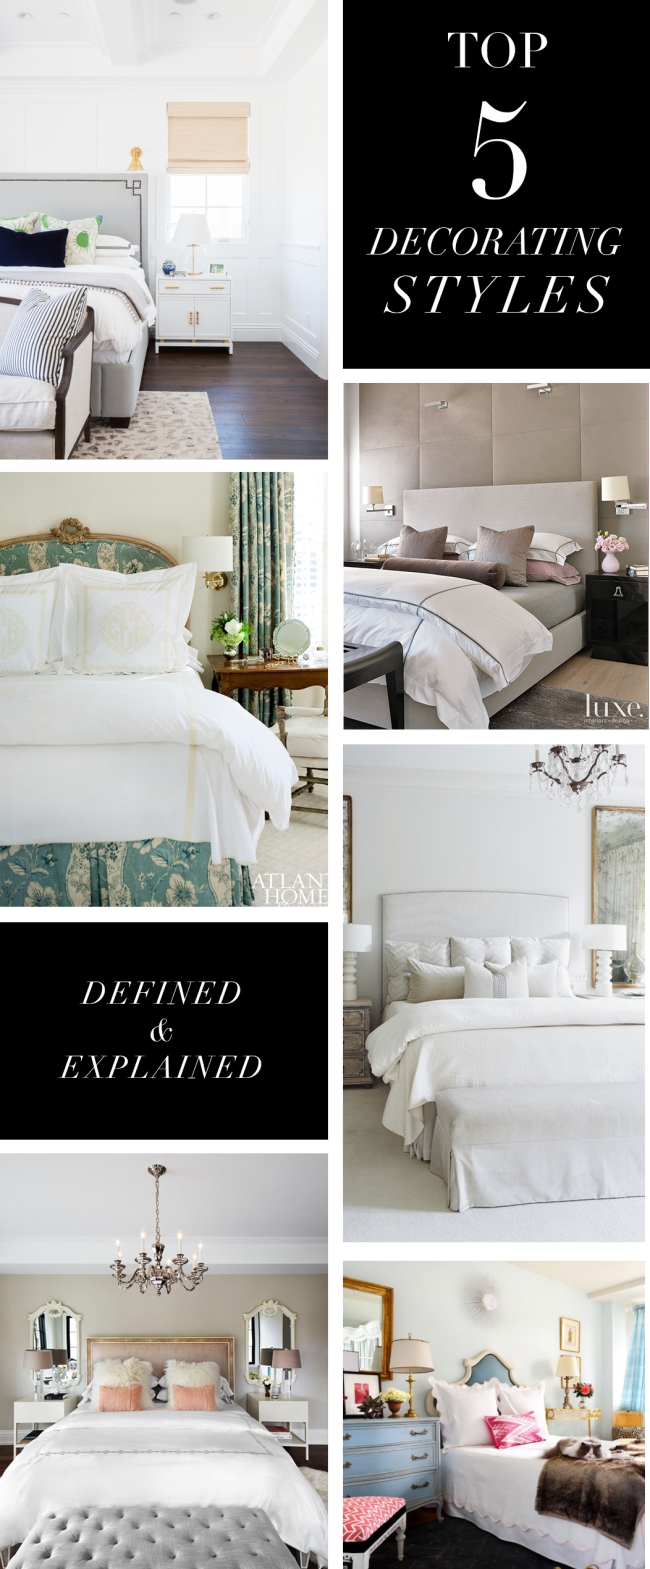 Top 5 Decorating Styles and Bedroom Themes by Brighton The Day Blog